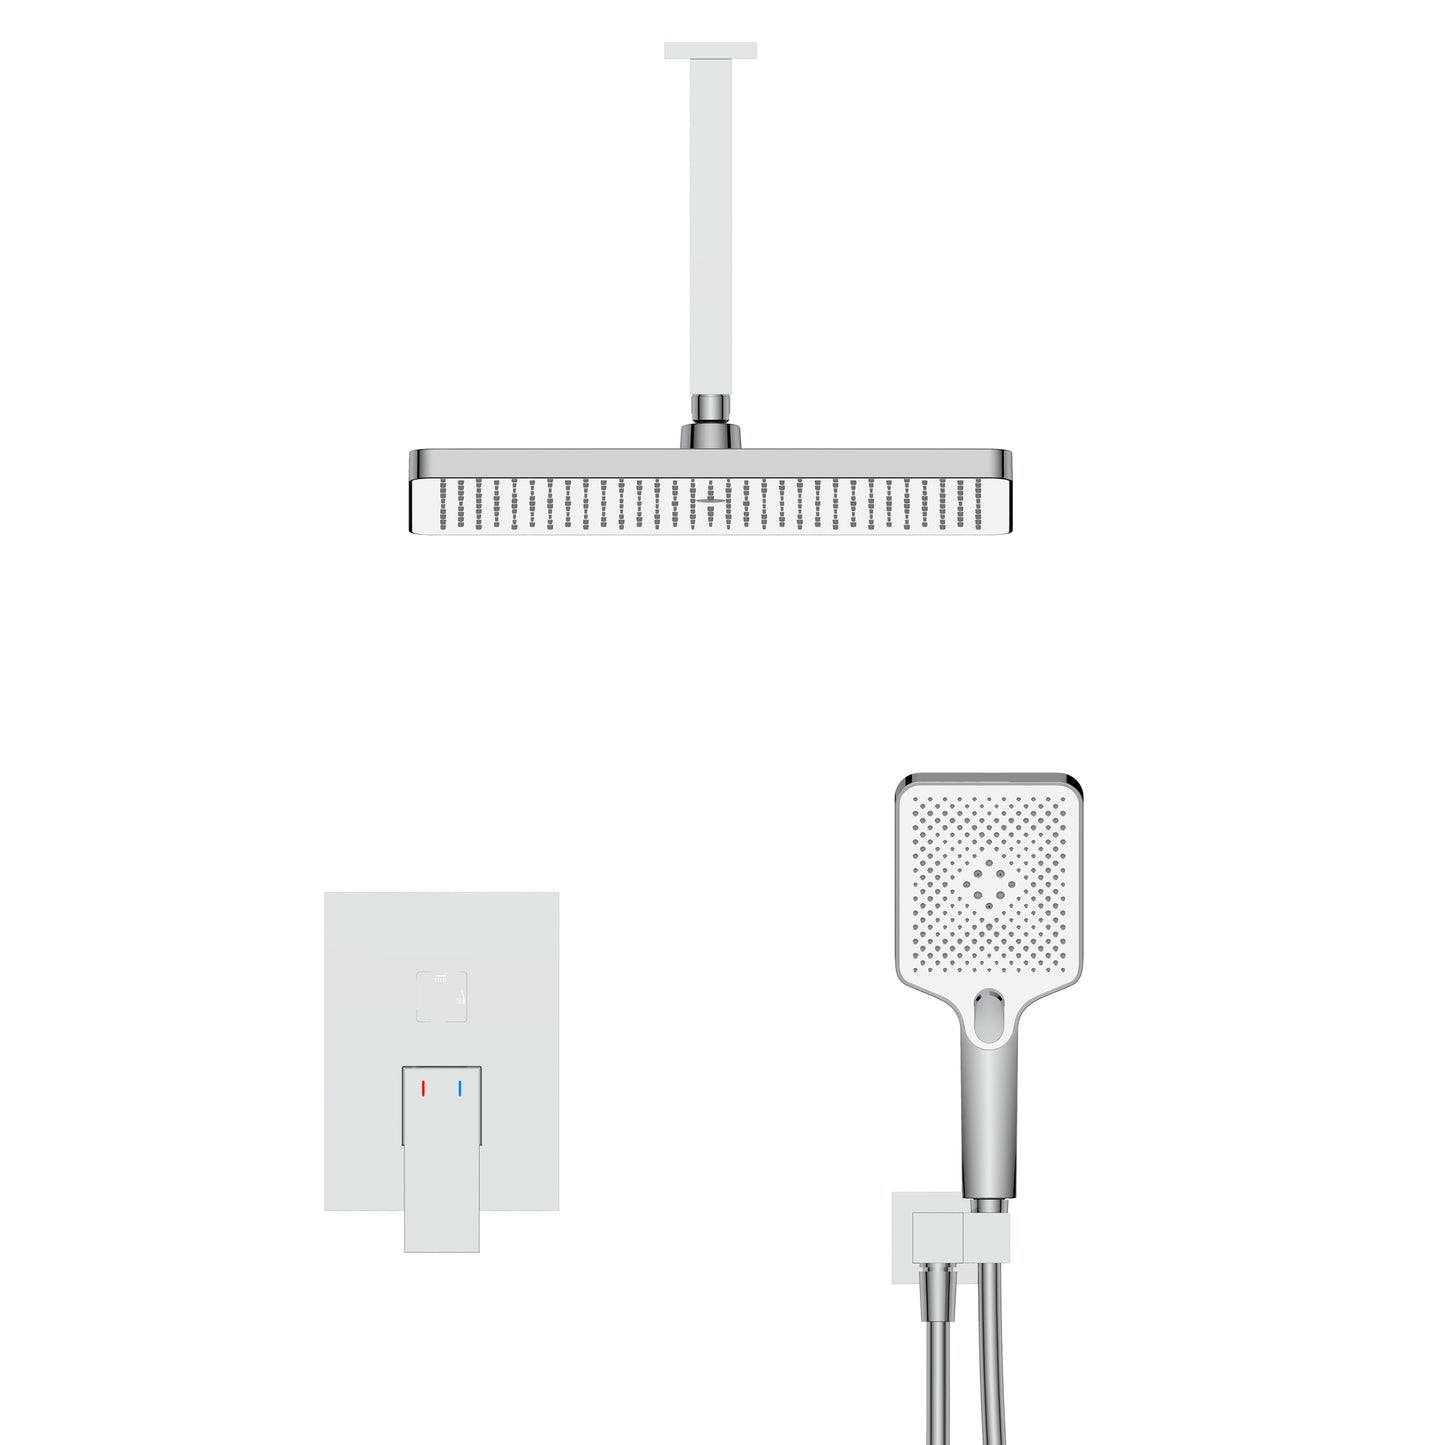 Shower System, Ultra-thin Wall Mounted Shower Faucet Set for Bathroom with High Pressure Big Size Stainless Steel Rain Shower head Handheld Shower Set, 12 inch square large panel, Chrome